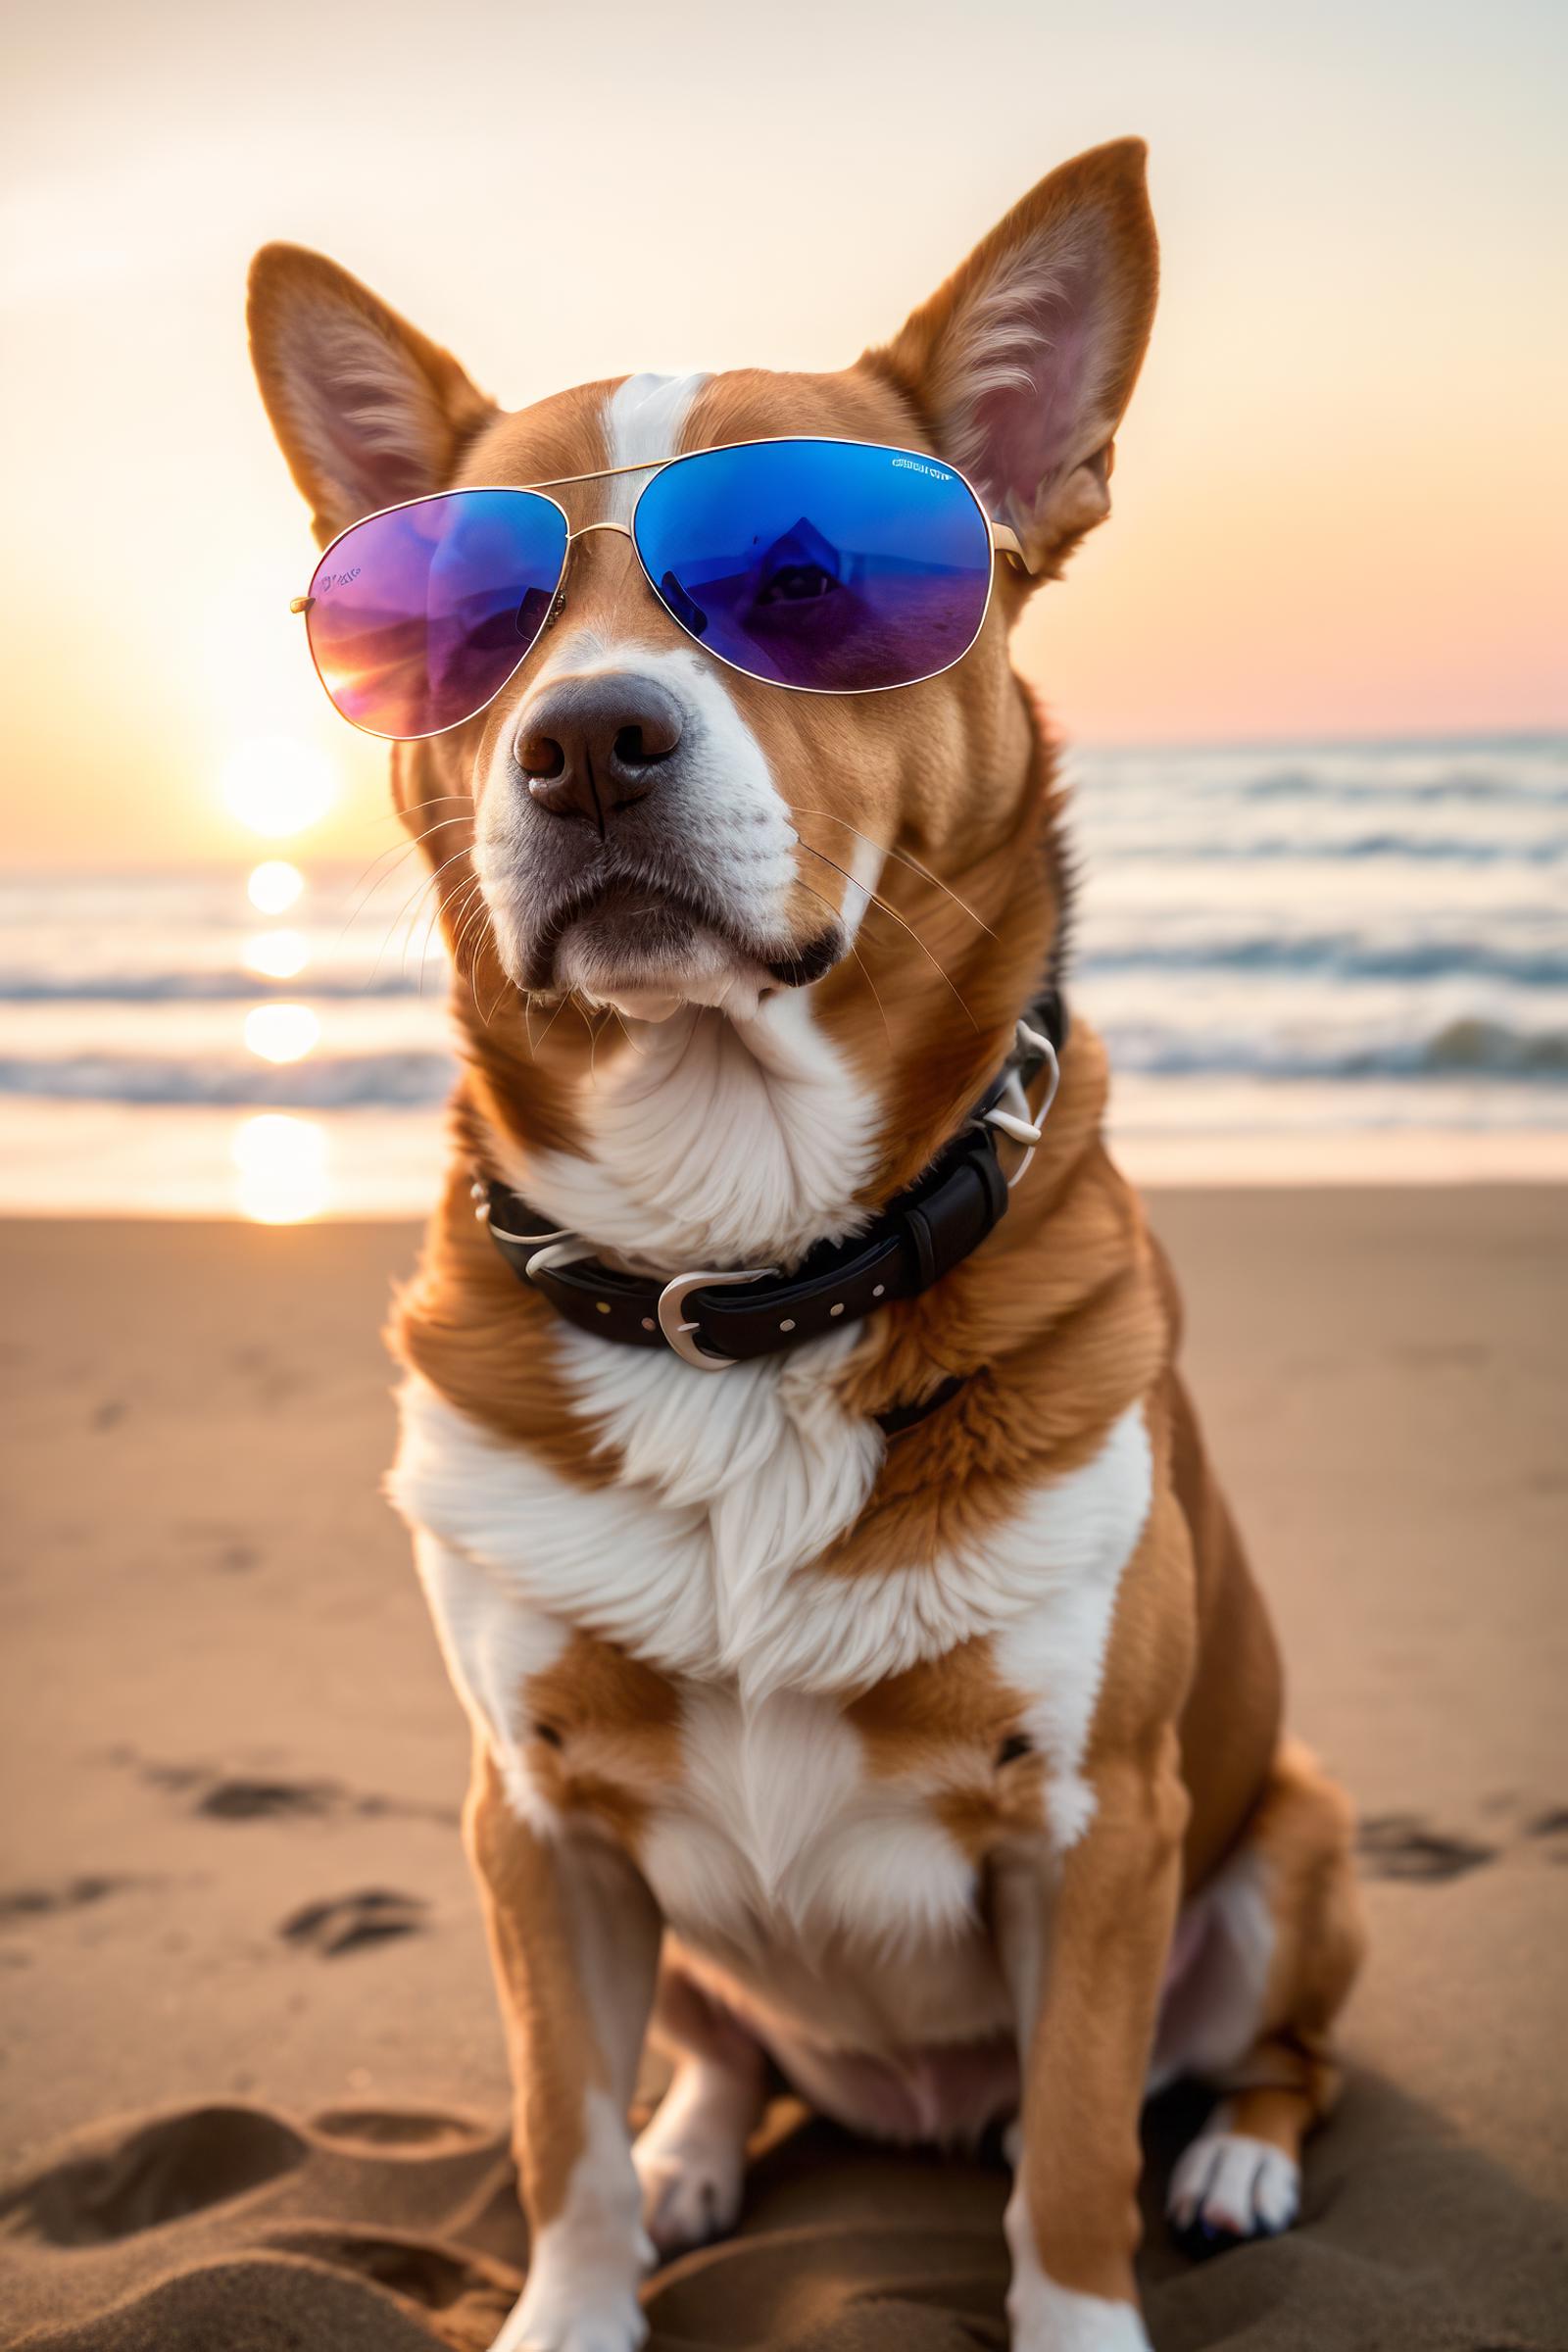 Brown and white dog wearing sunglasses on a beach.